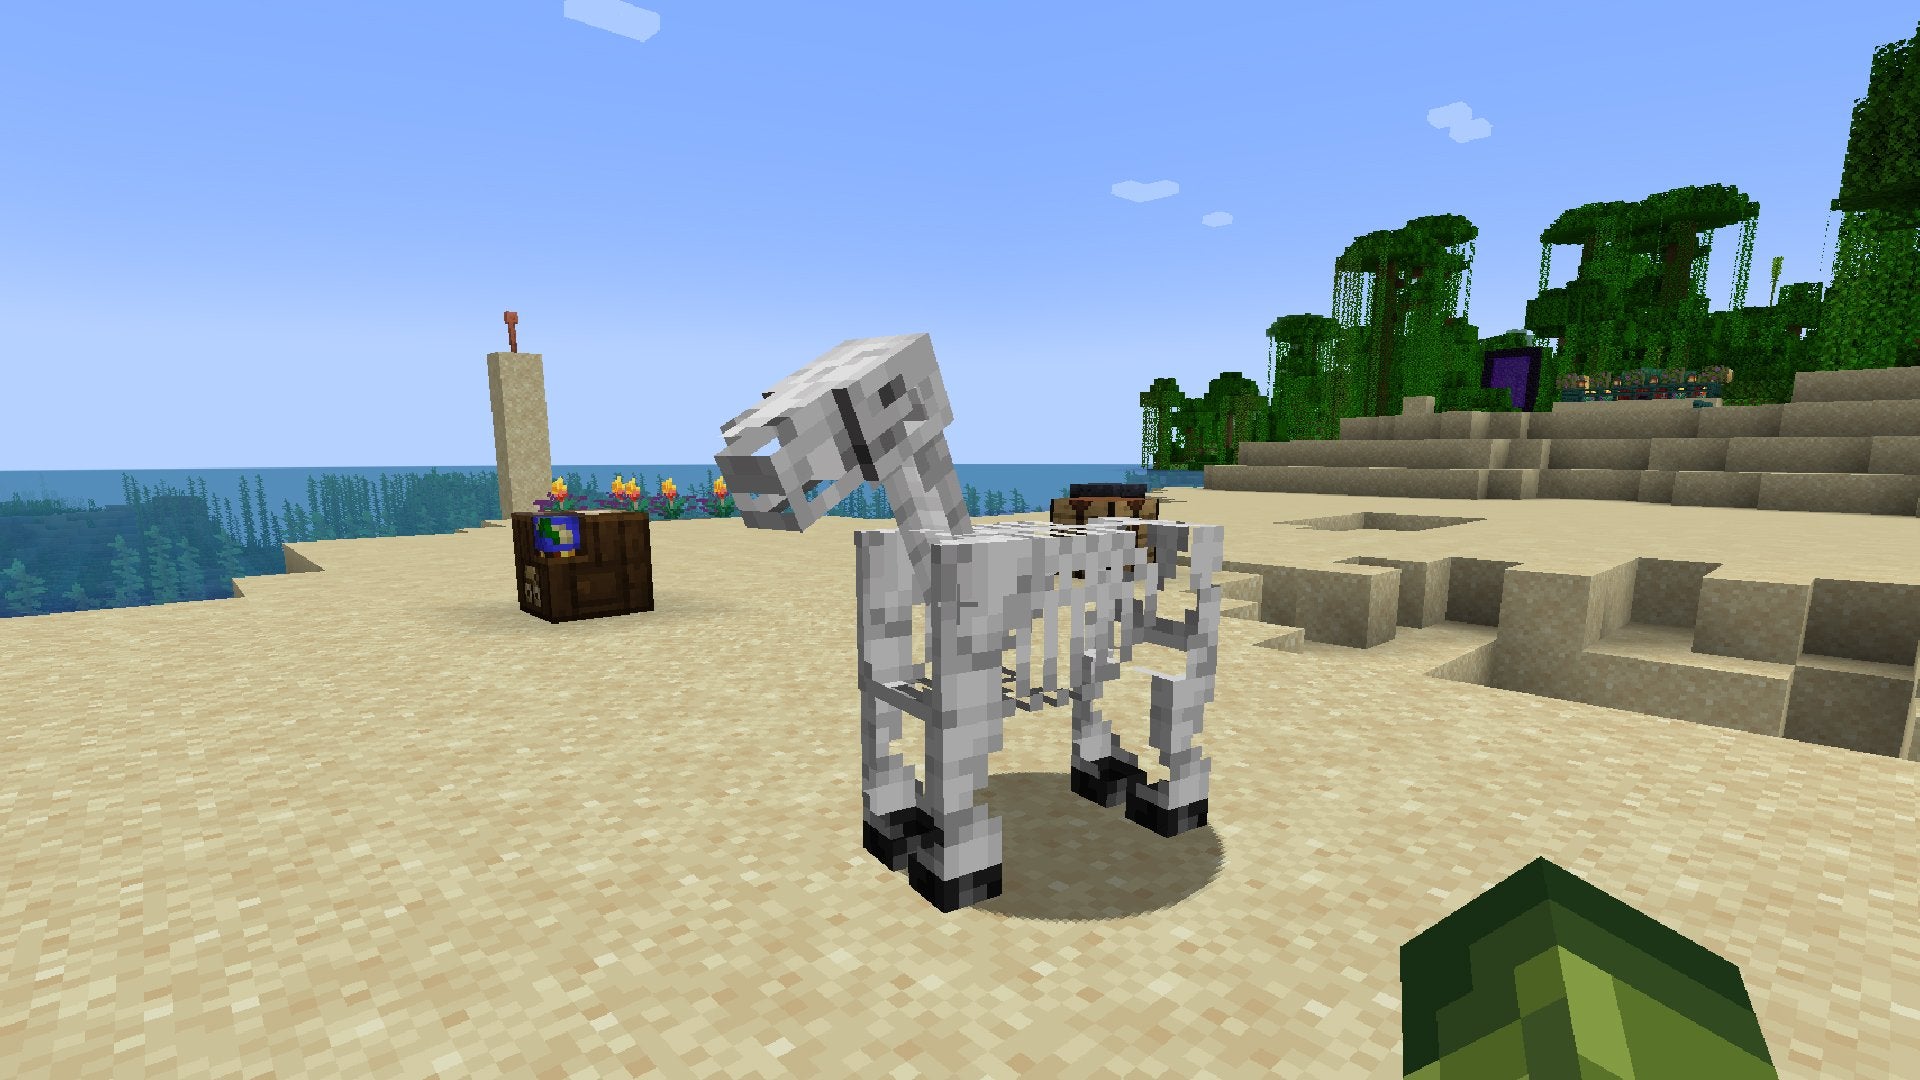 A Skeleton Horse in Minecraft standing on the beach.